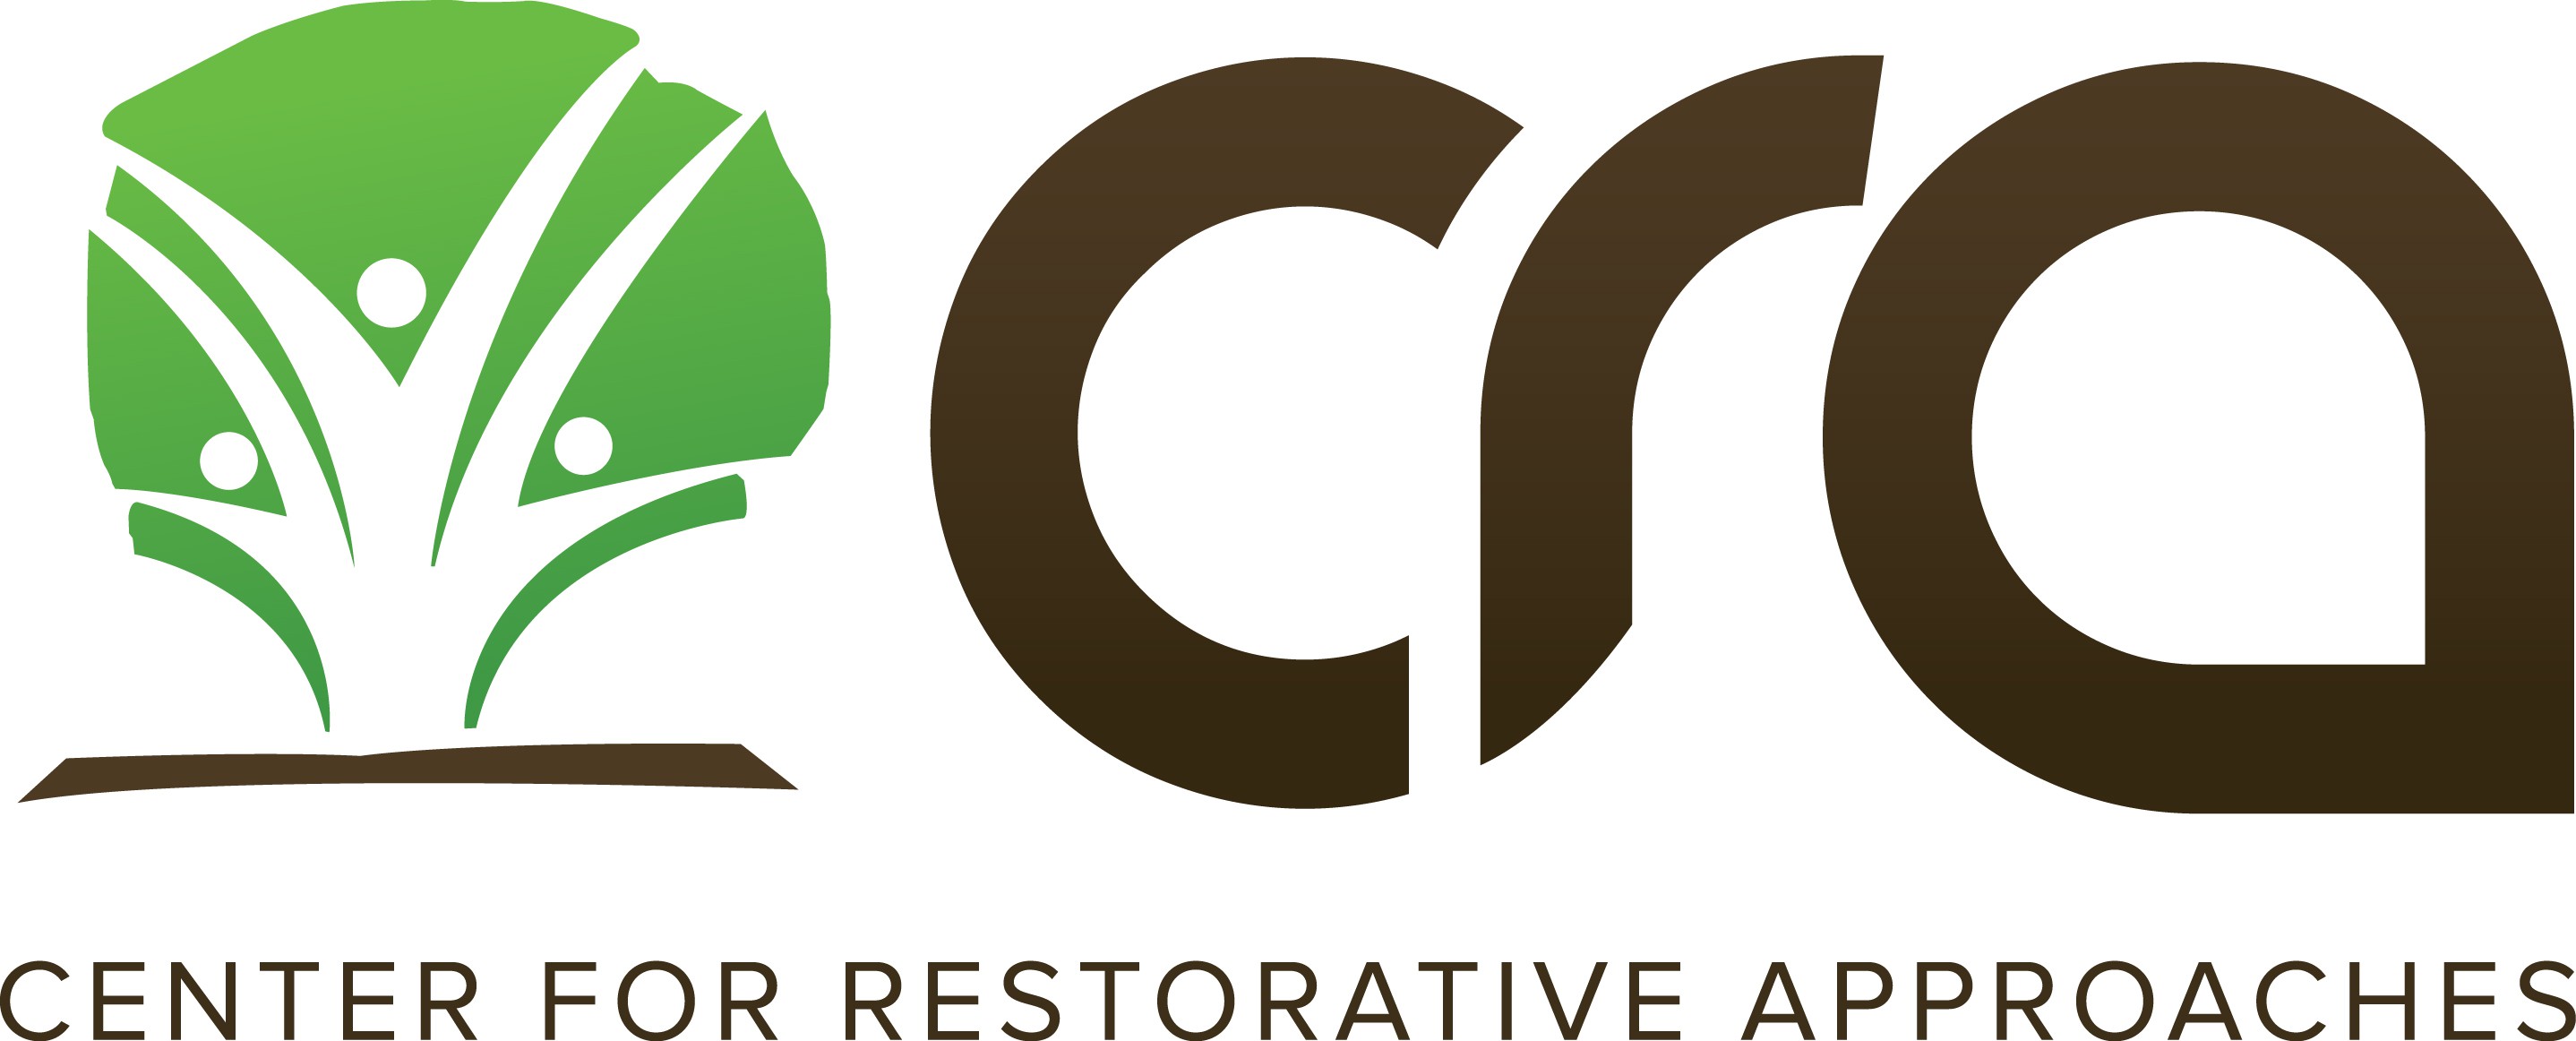 Center for Restorative Approaches